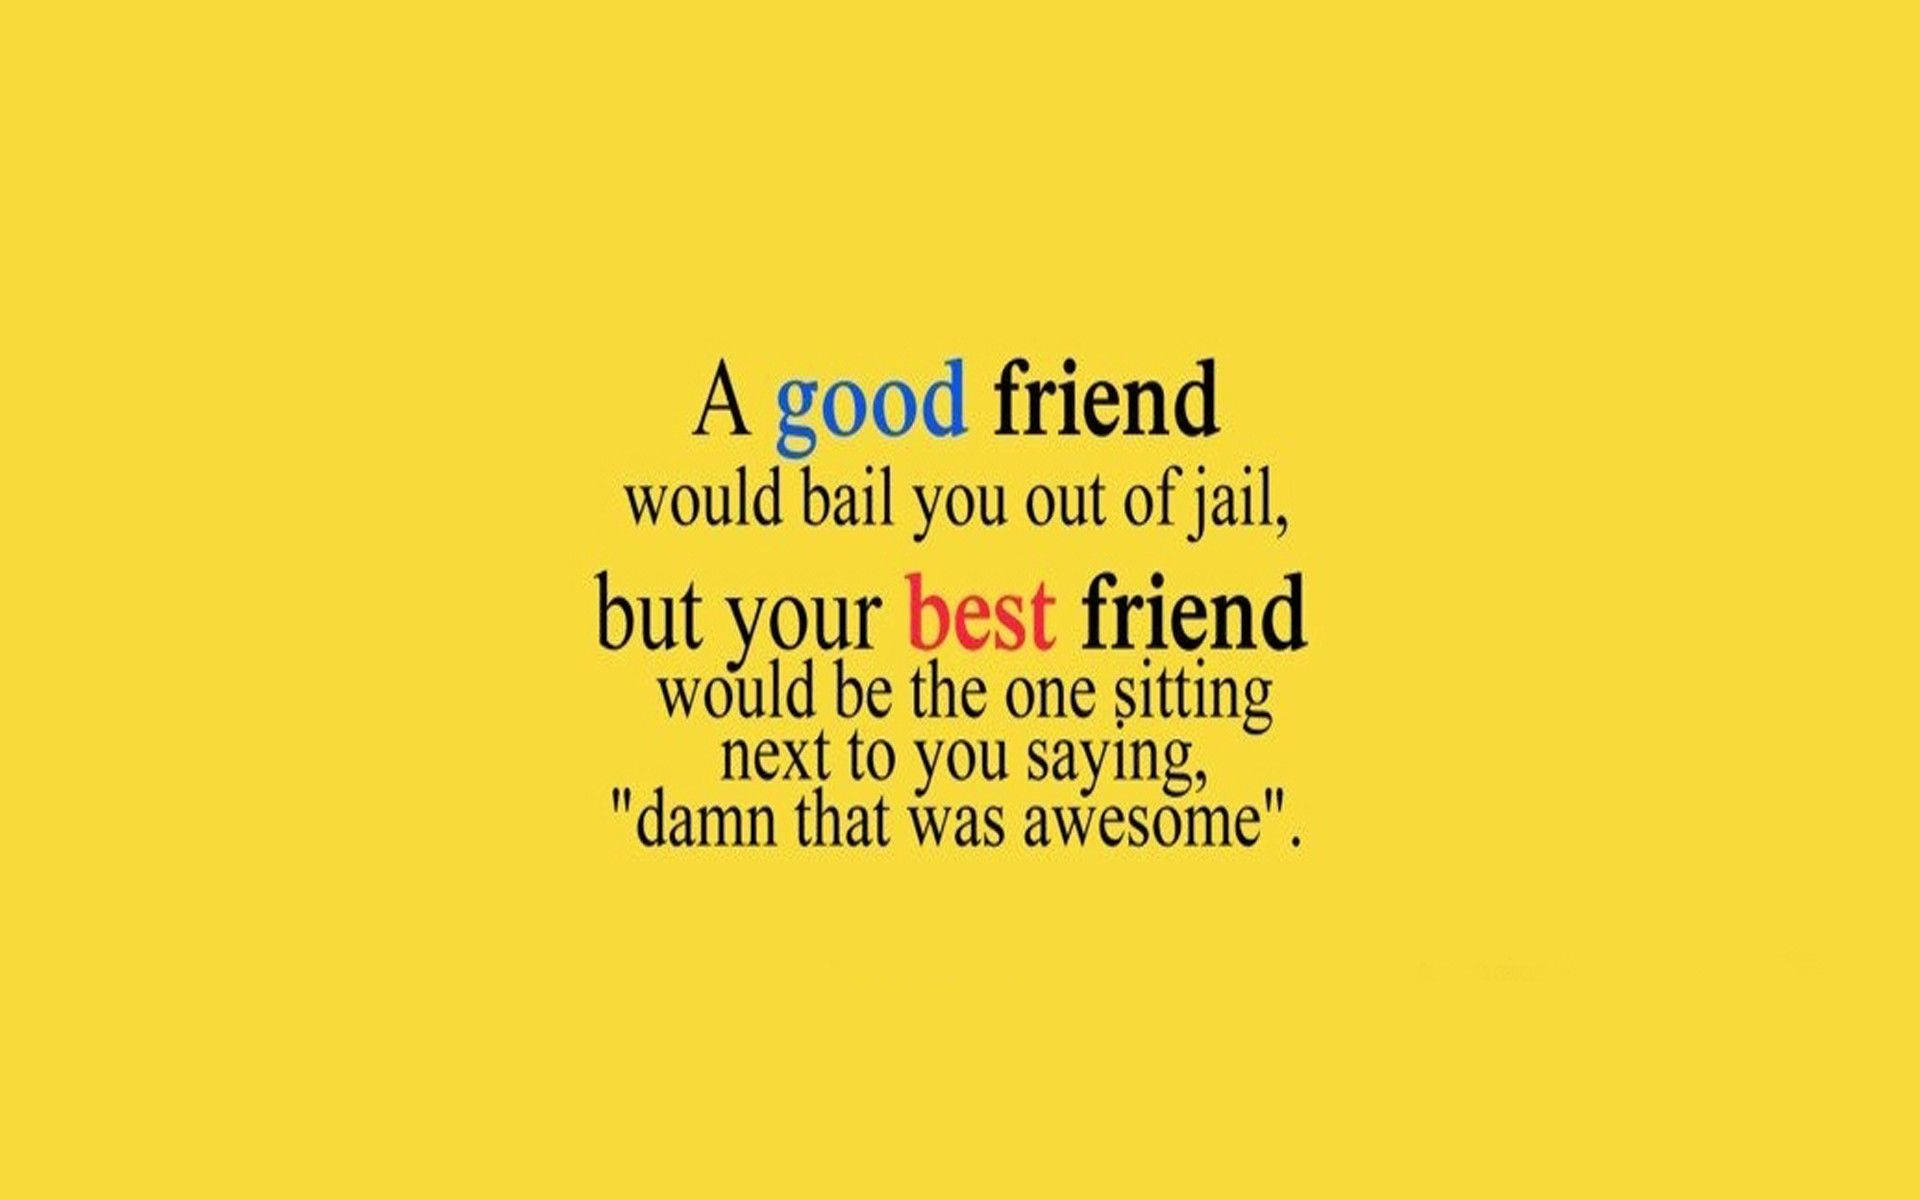 Best Friend Quote In Yellow Background